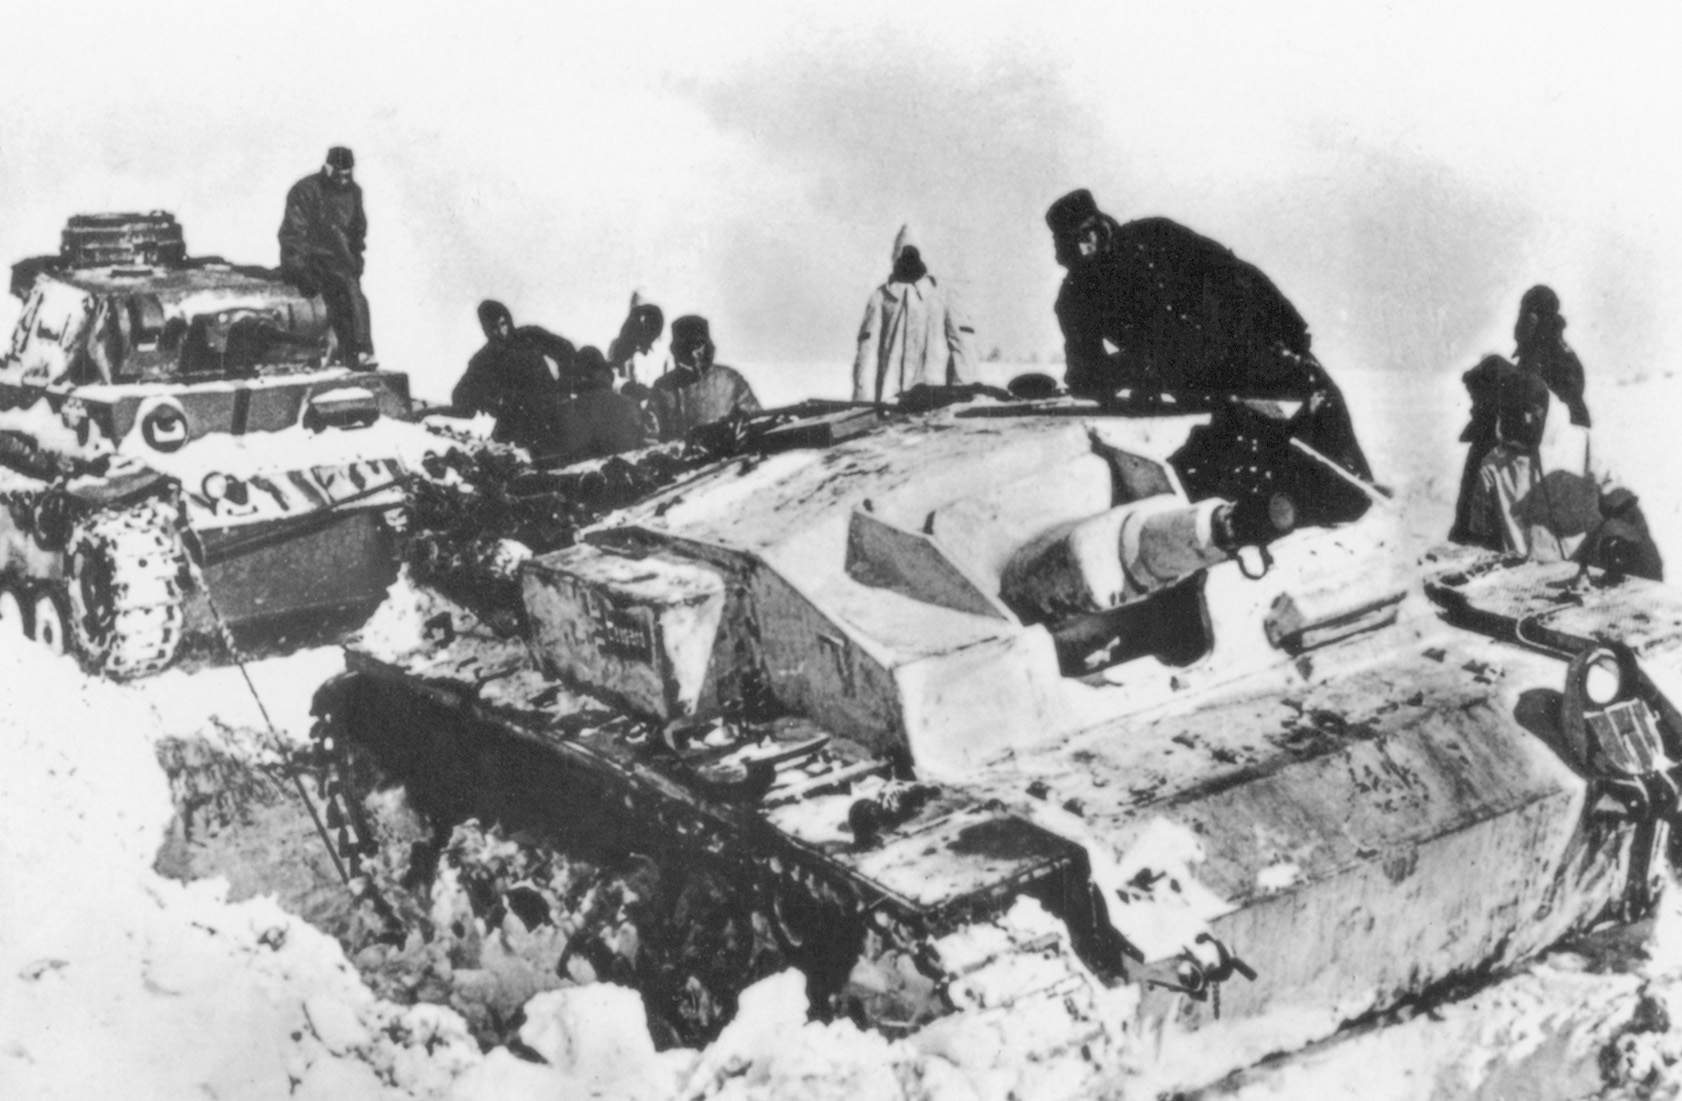 German troops not only battled the Soviets but the cruel elements as well. Here, a German tank drags an immobilized assault gun from a snowdrift.